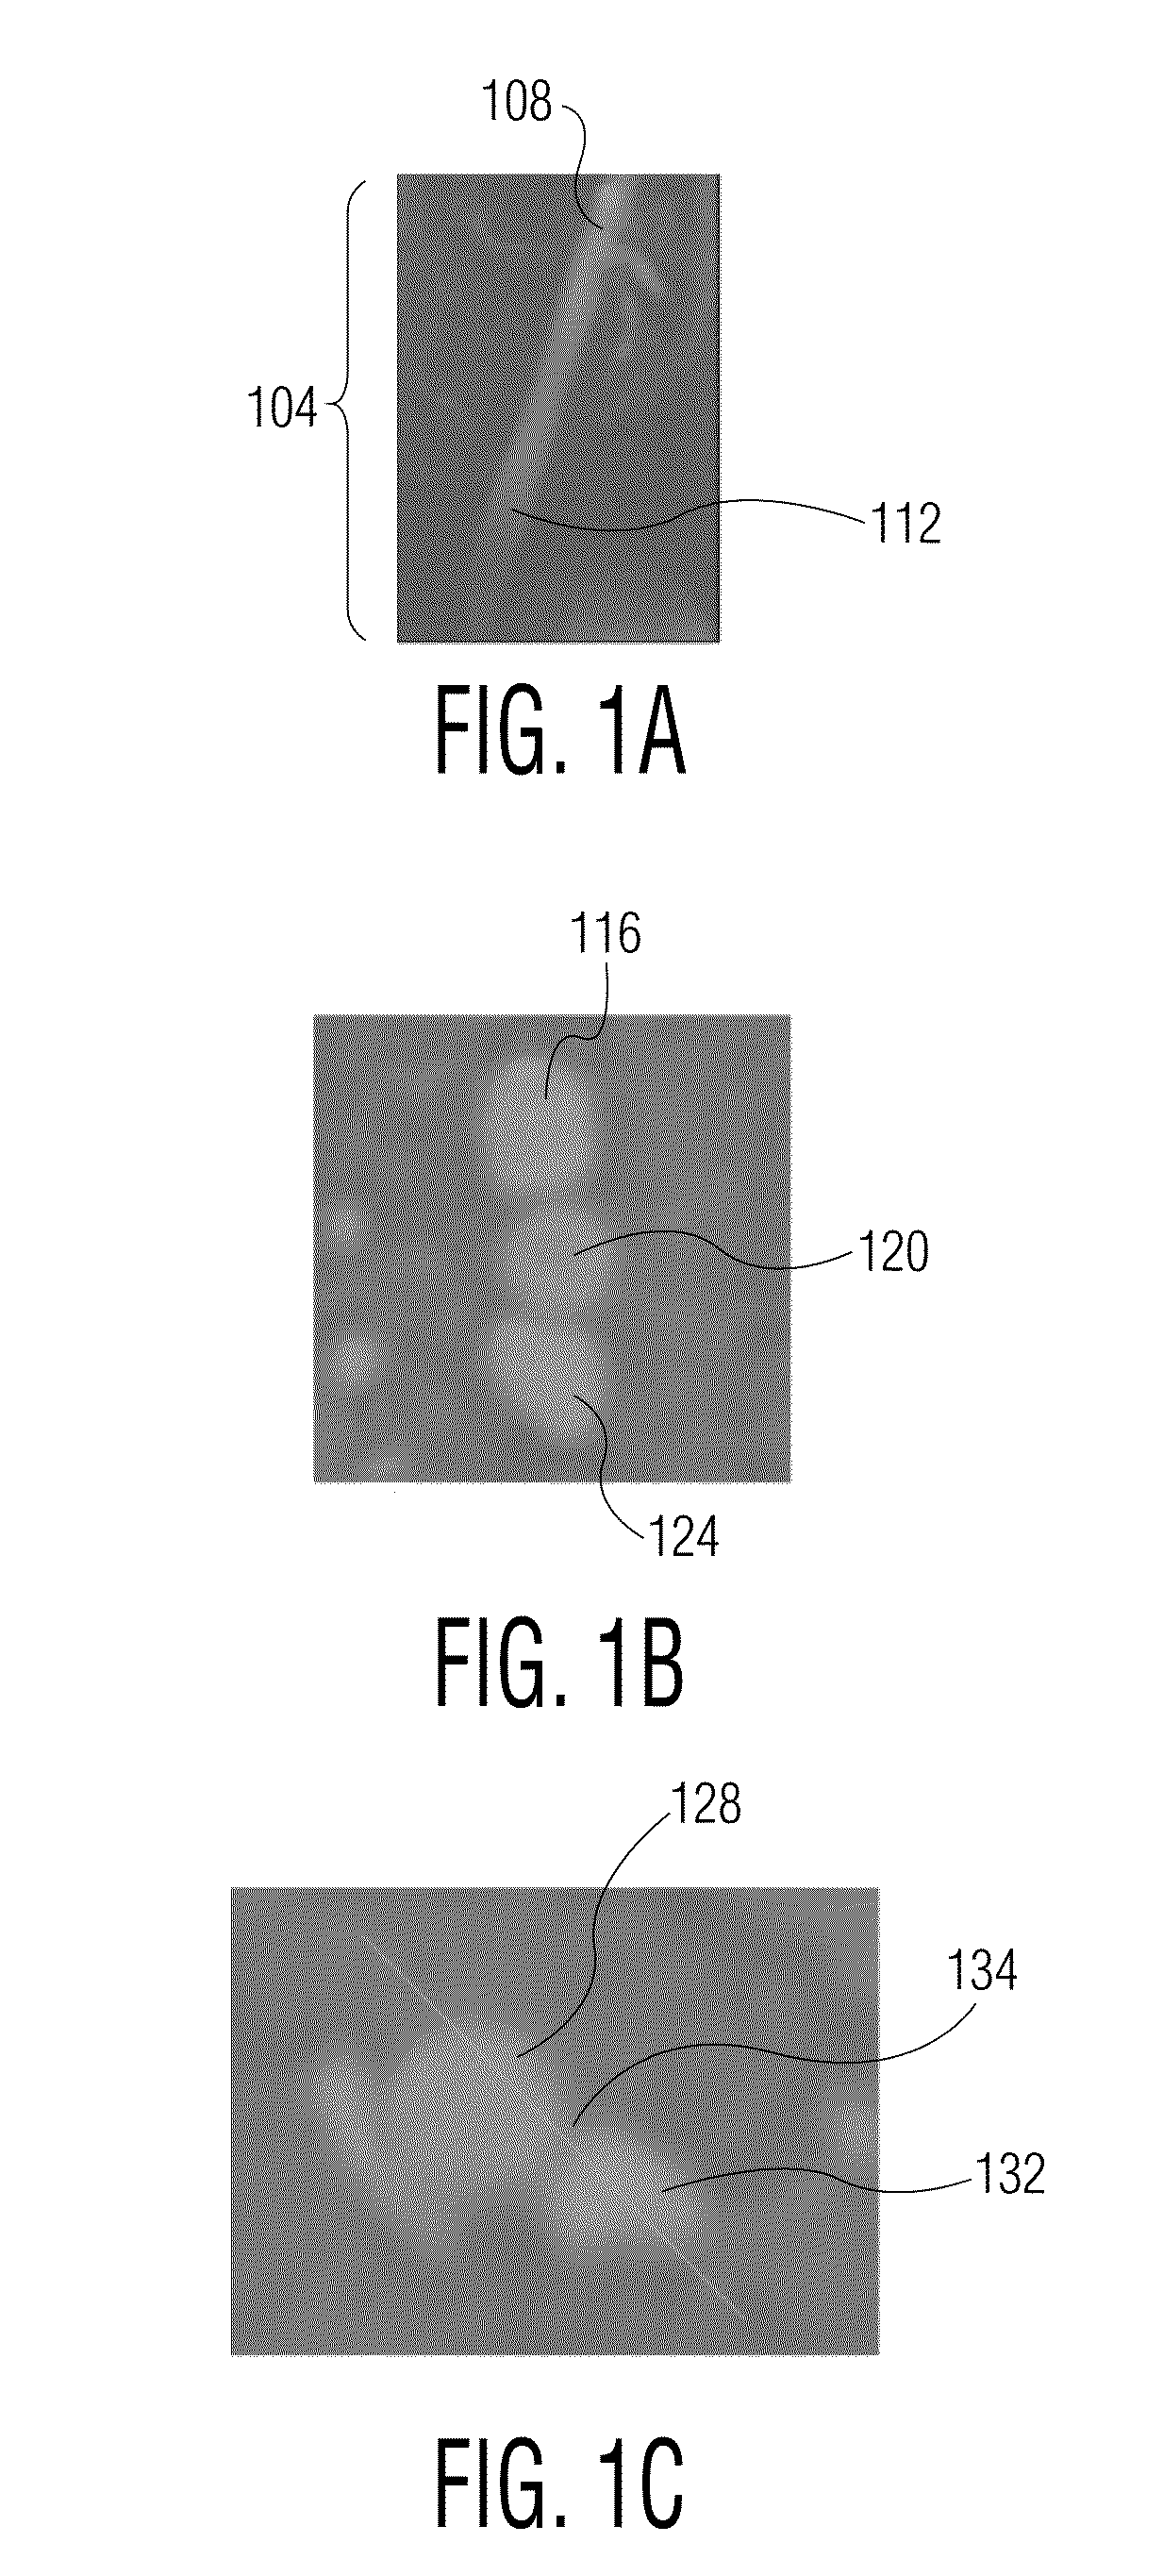 Method and apparatus for detecting blood vessel boundaries using multi-scale mean-shift ray propagation